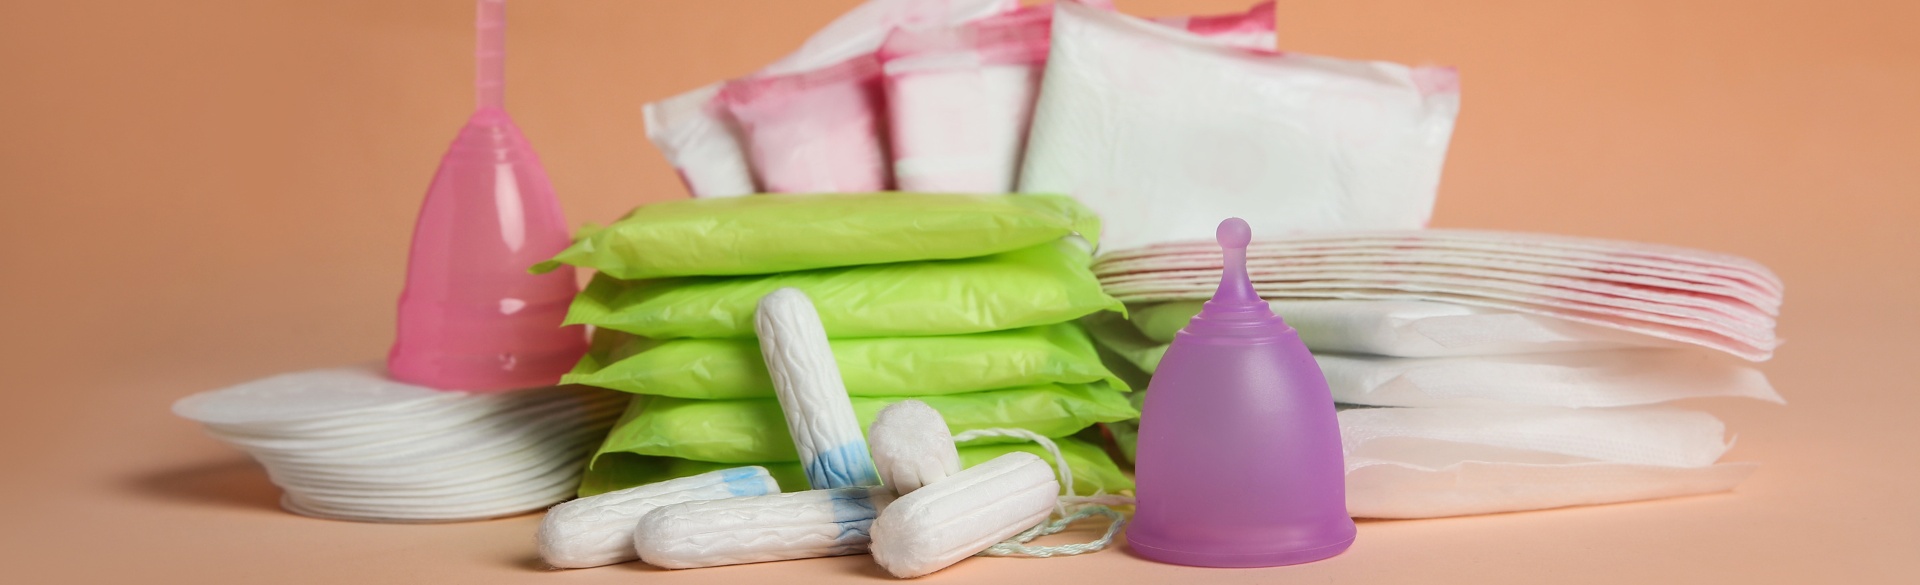 Different types of menstrual products